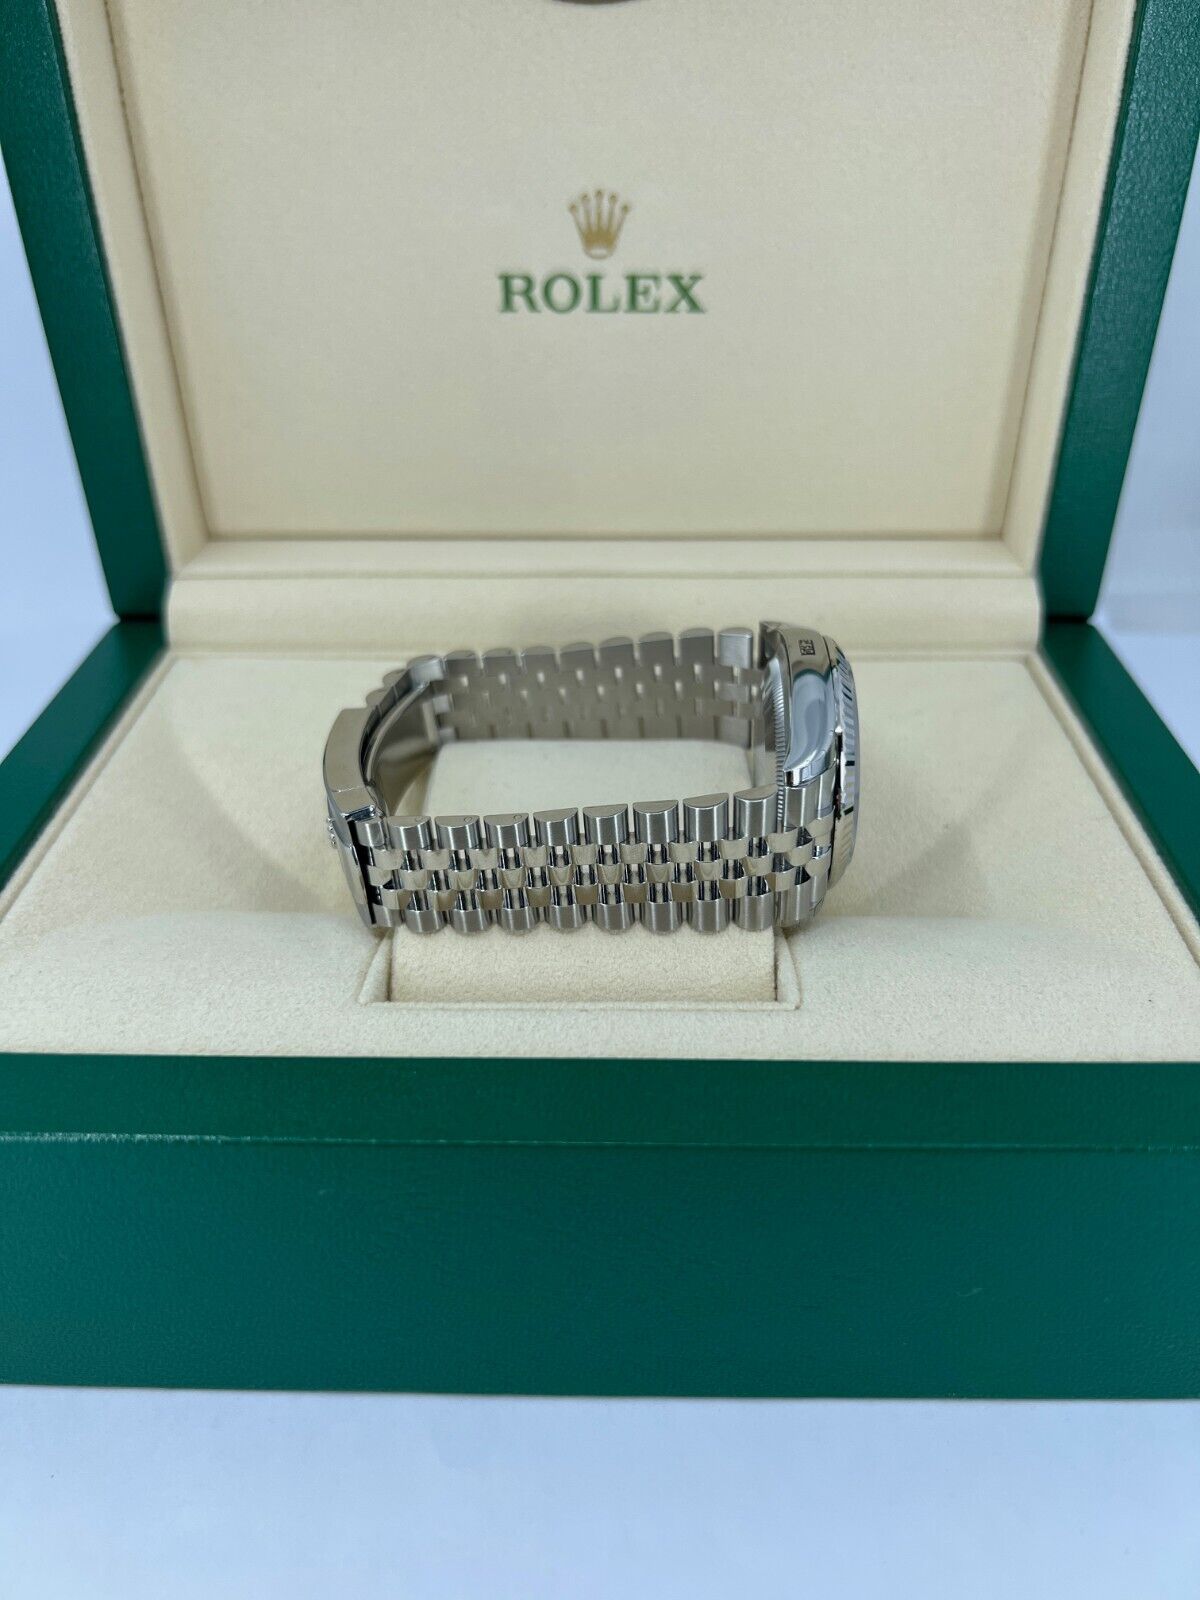 Rolex, Datejust 36, Oystersteel and 18k White Gold, 36mm, Green Mint Dial, Fluted, Jubilee, Ref# 126234-0051, Bracelet